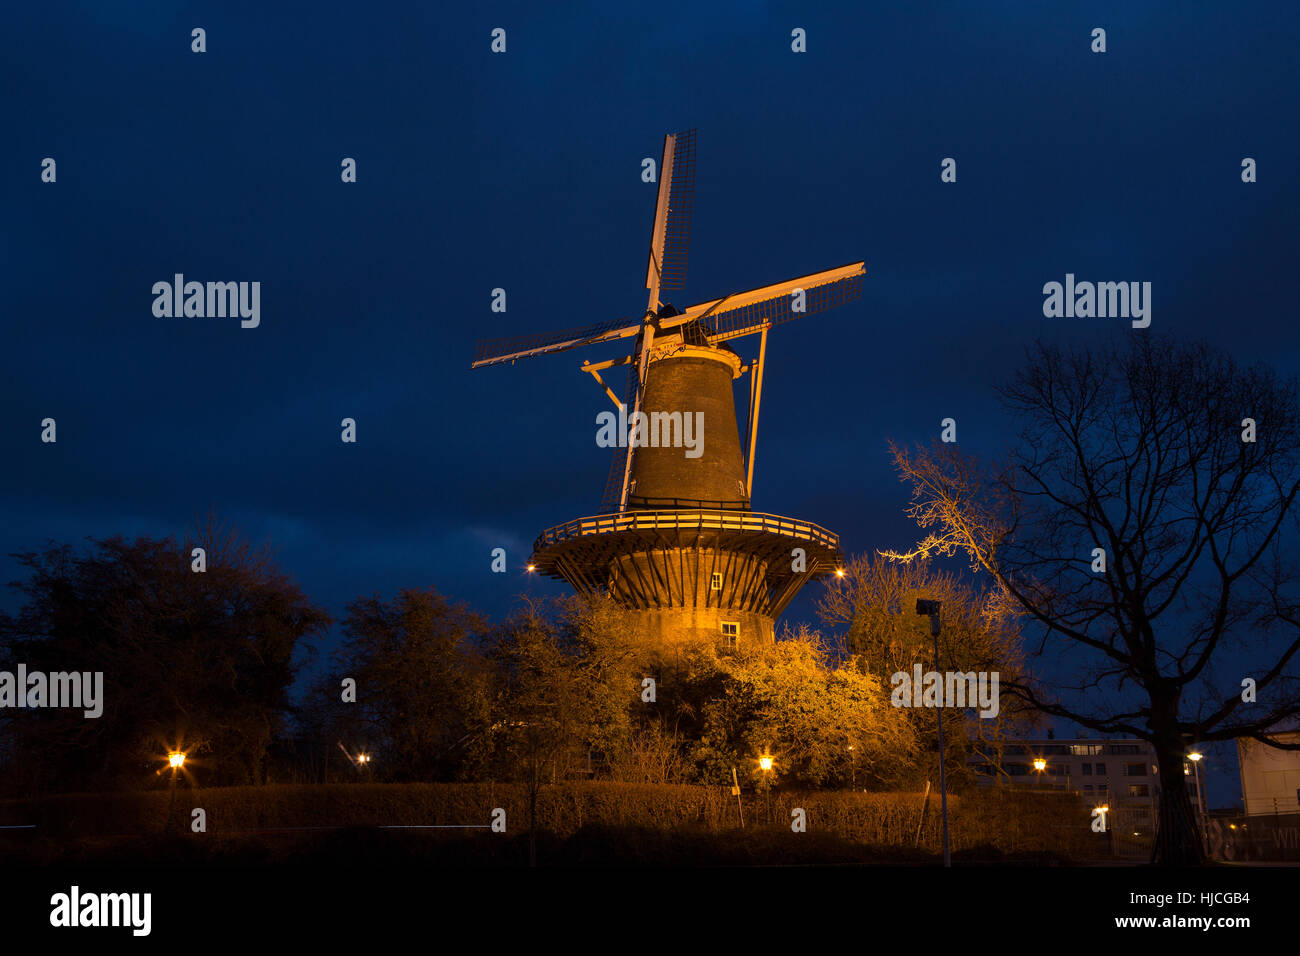 Iconic dutch Windmill in the University town of Leiden in the Netherlands. Stock Photo